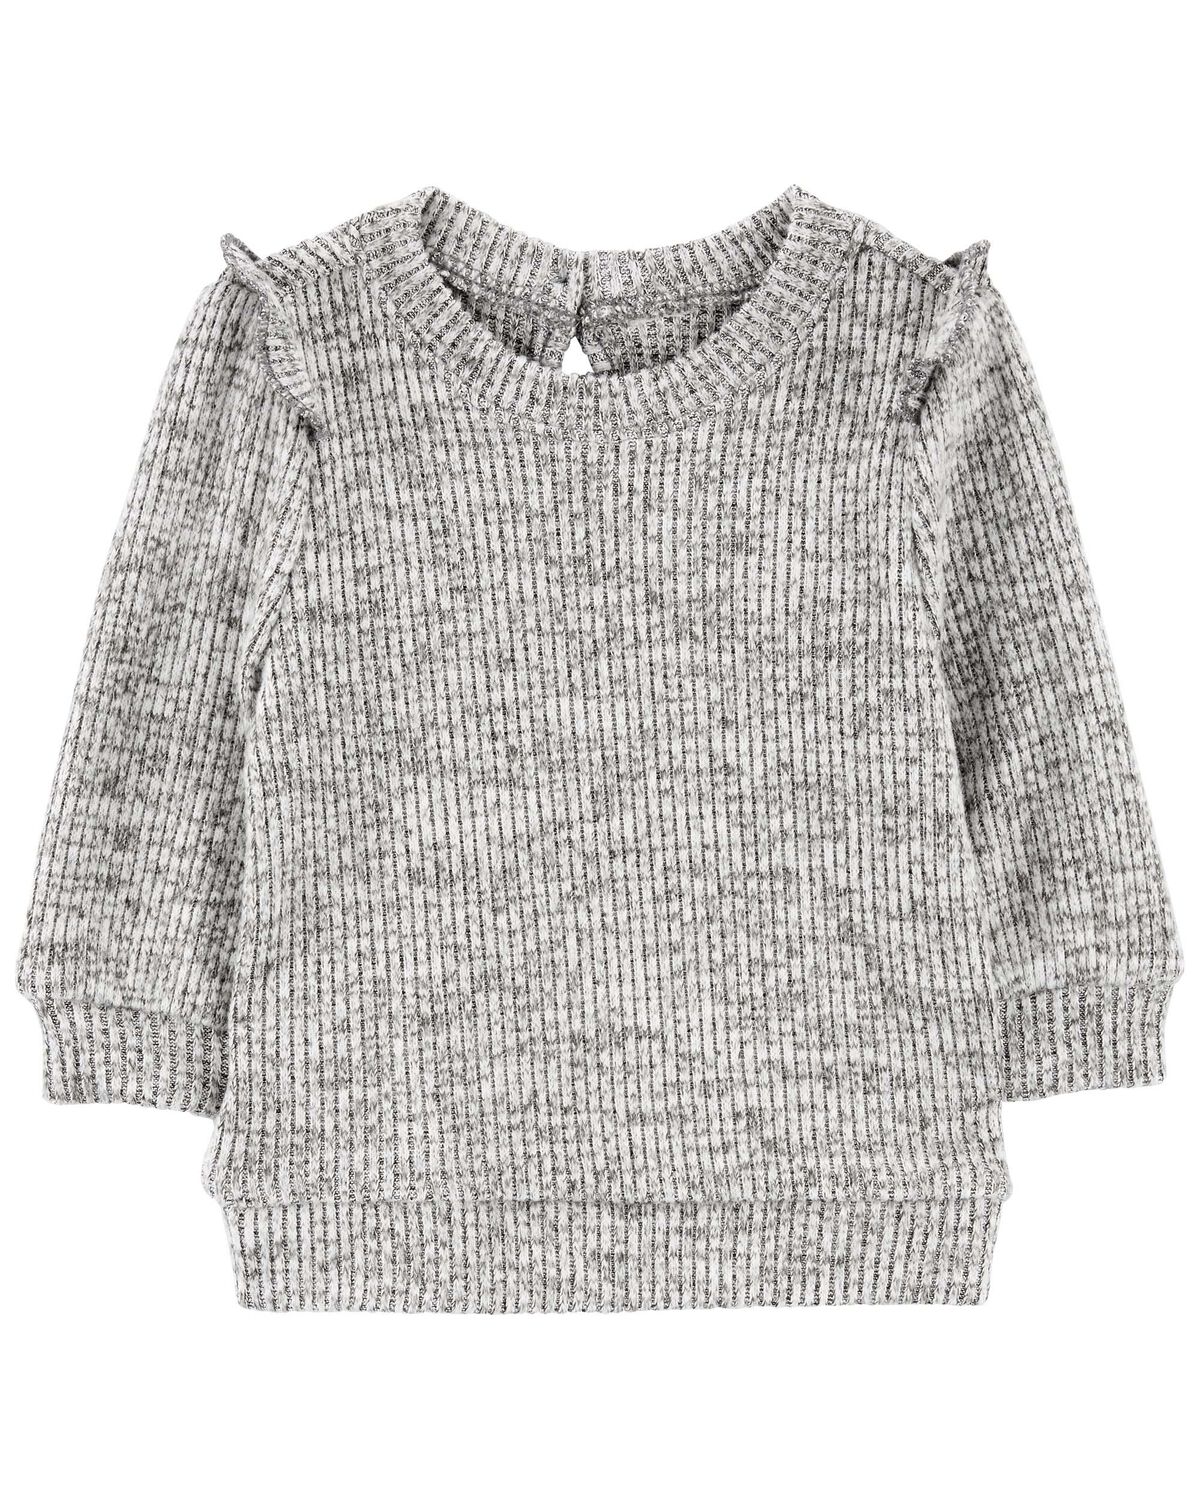 Heather Grey Baby Ribbed Knit Sweater | carters.com